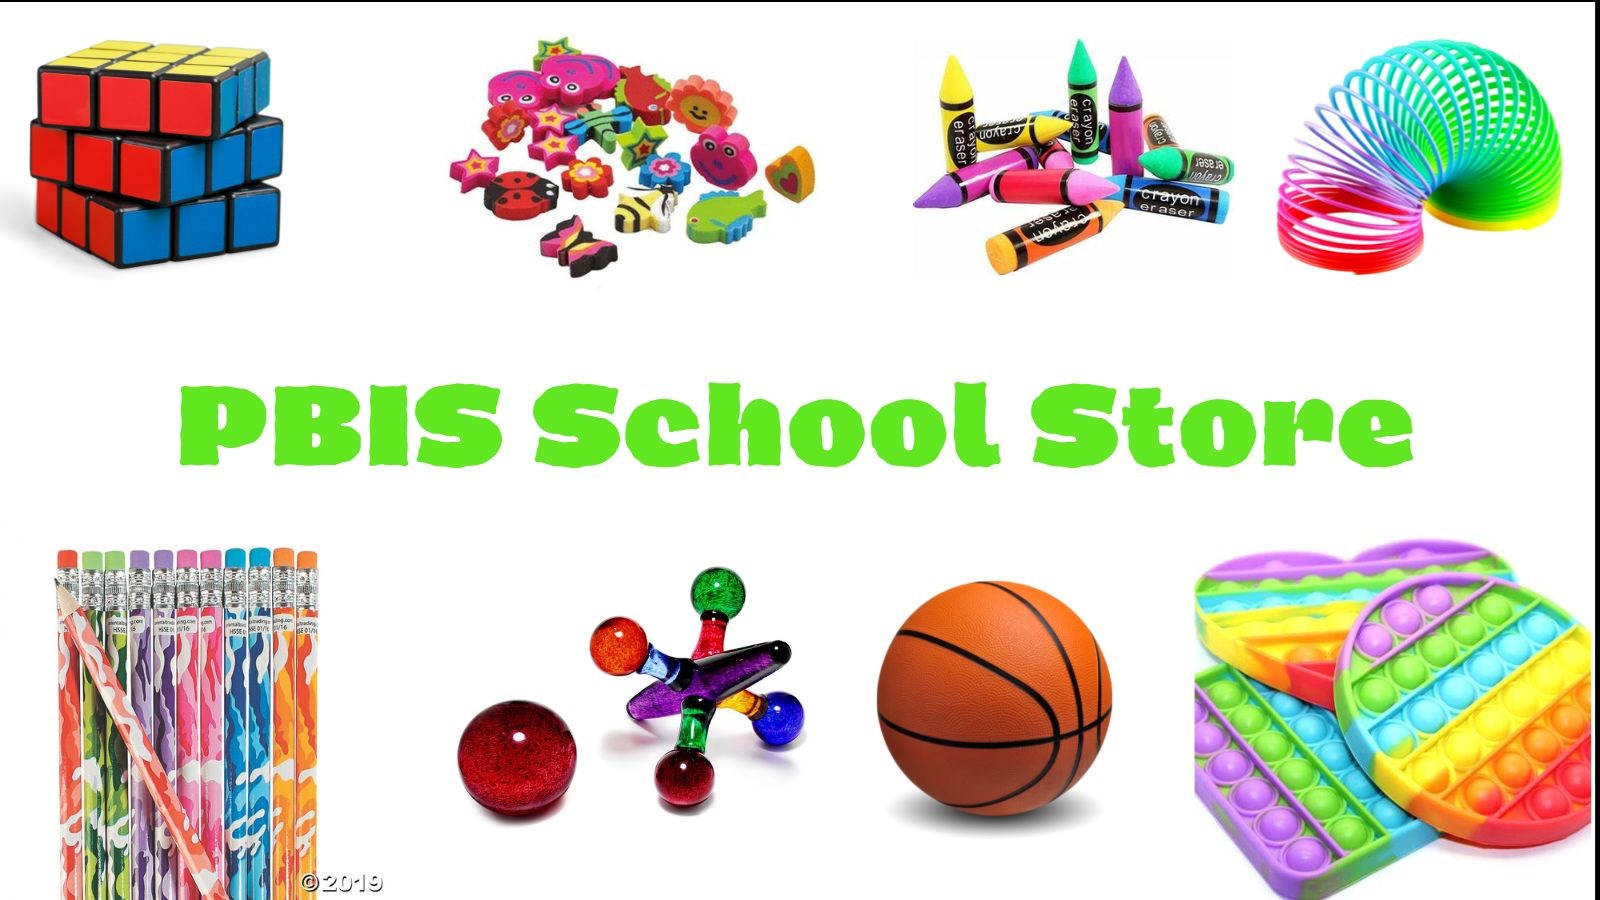 PBIS School Store written in lime green with examples of items such as pencils, pop its, erasers, rubix cube